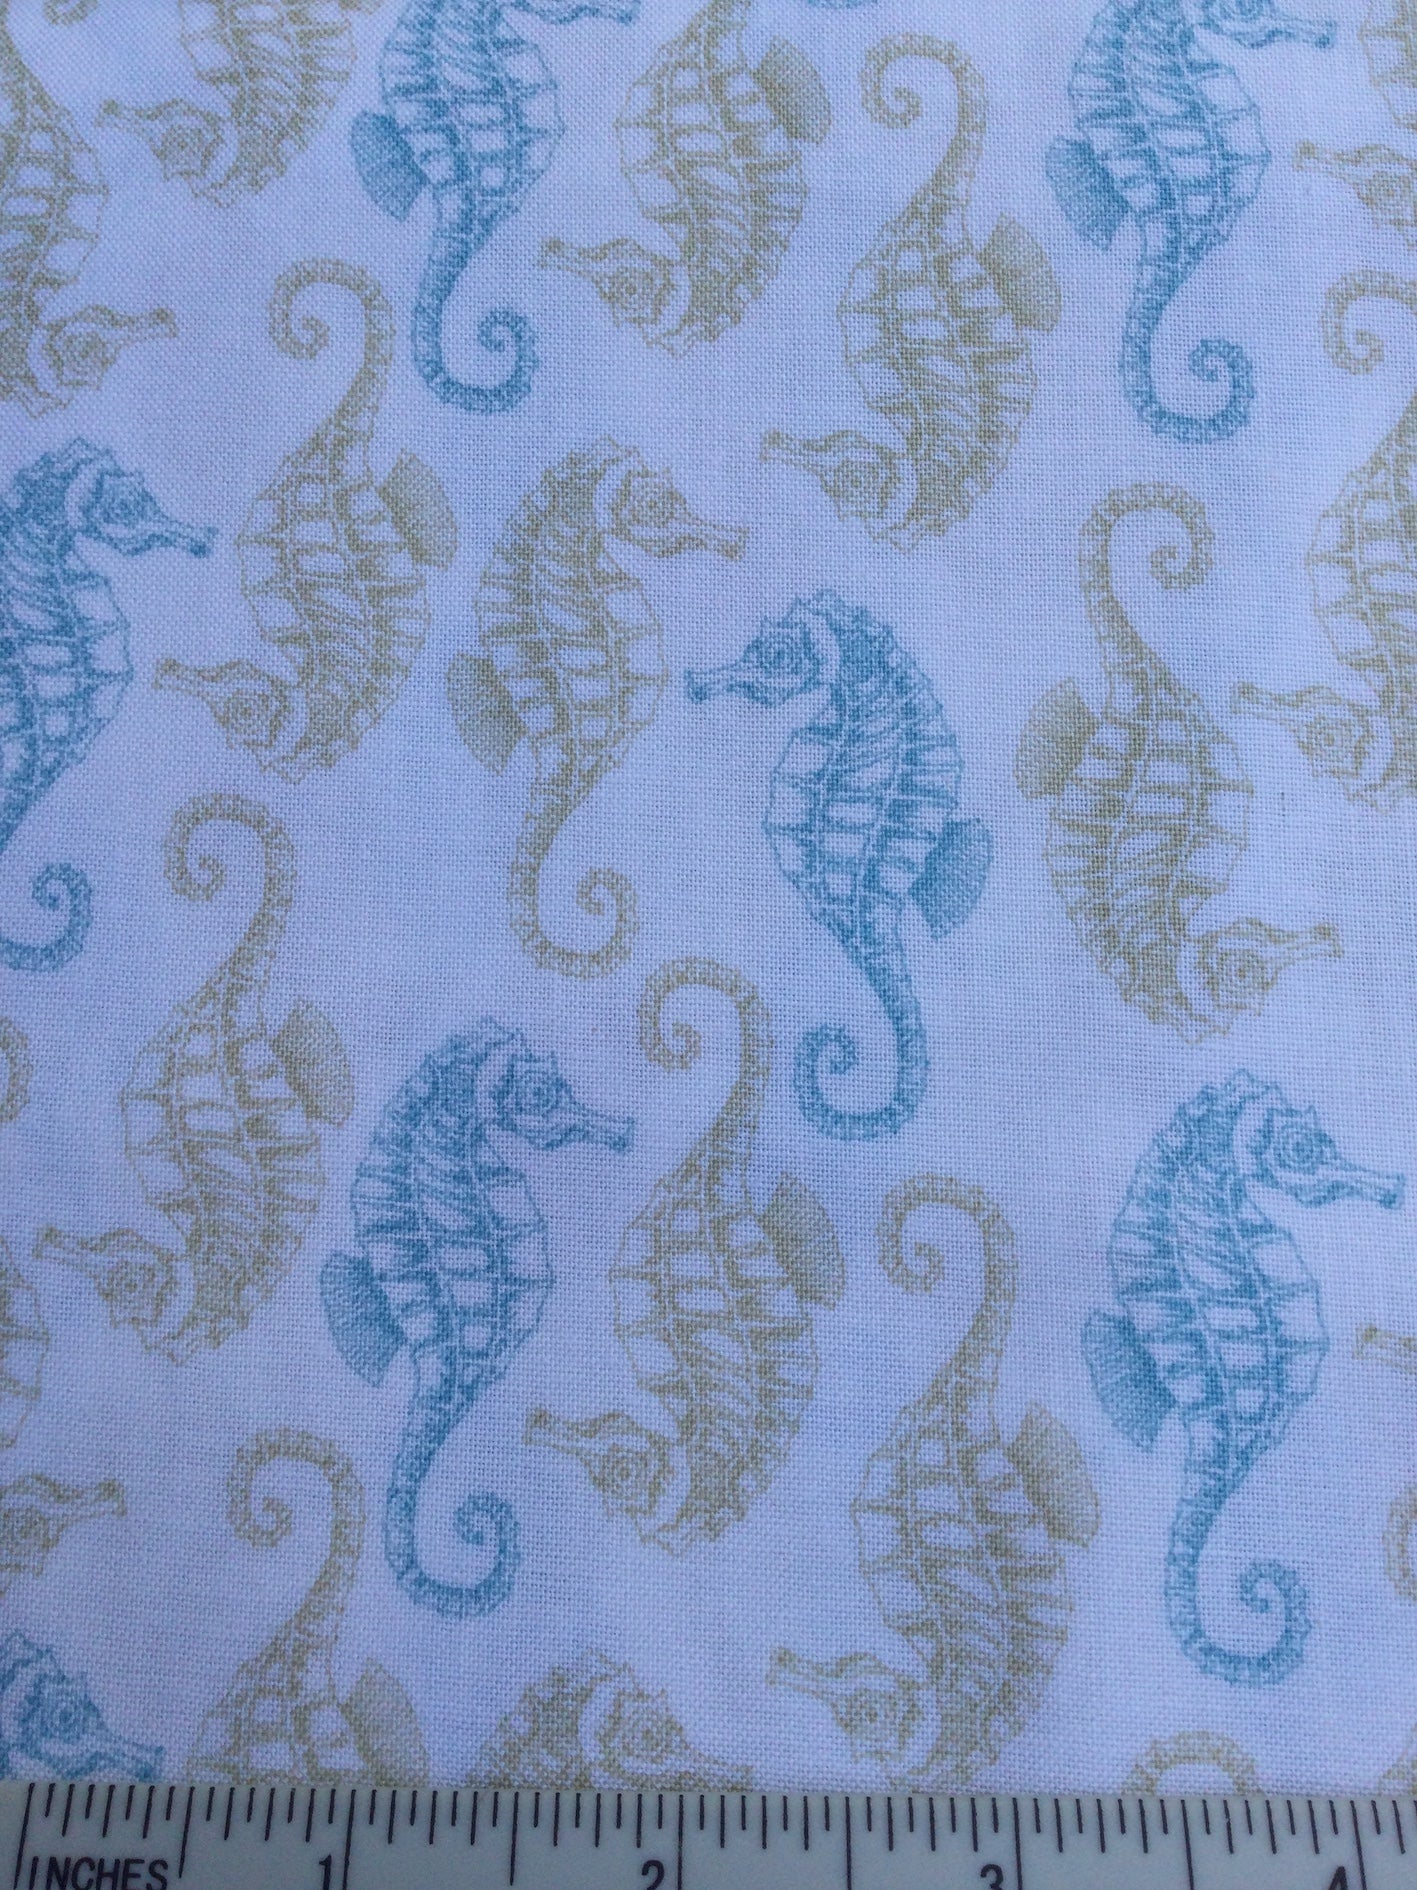 Beachcomber - FS114 - White background with Aqua Blue and Beige Seahorses print